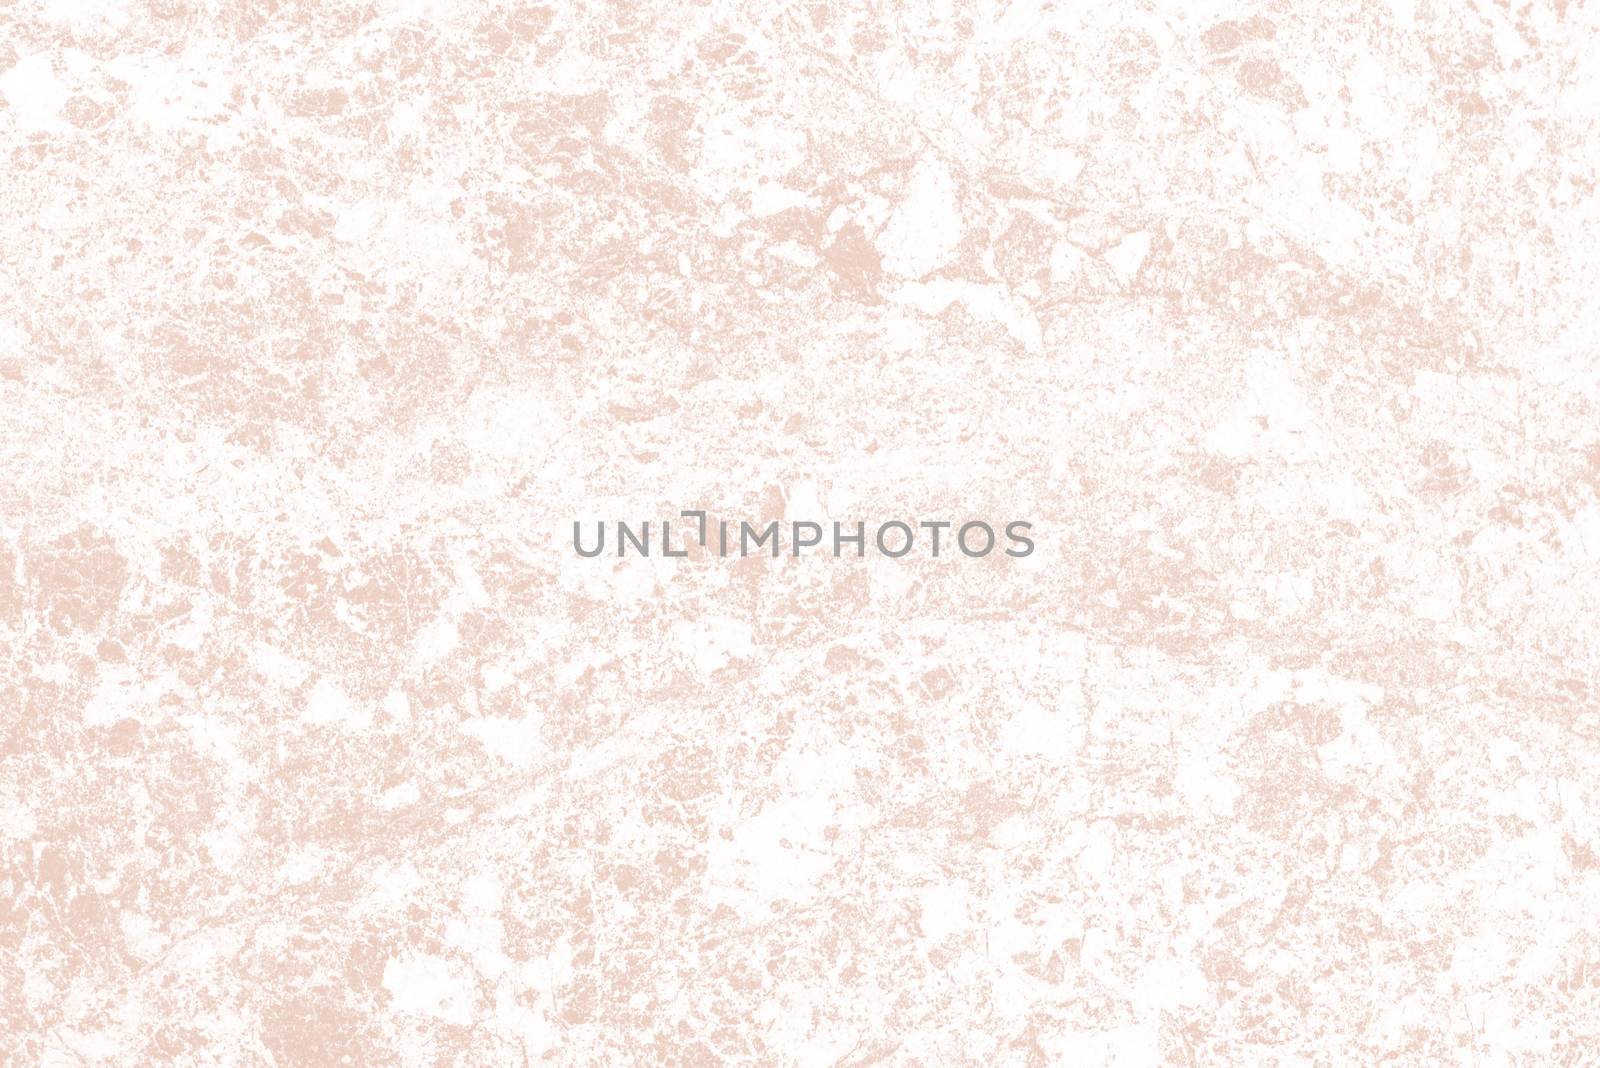 White and pink background. Abstract textured background